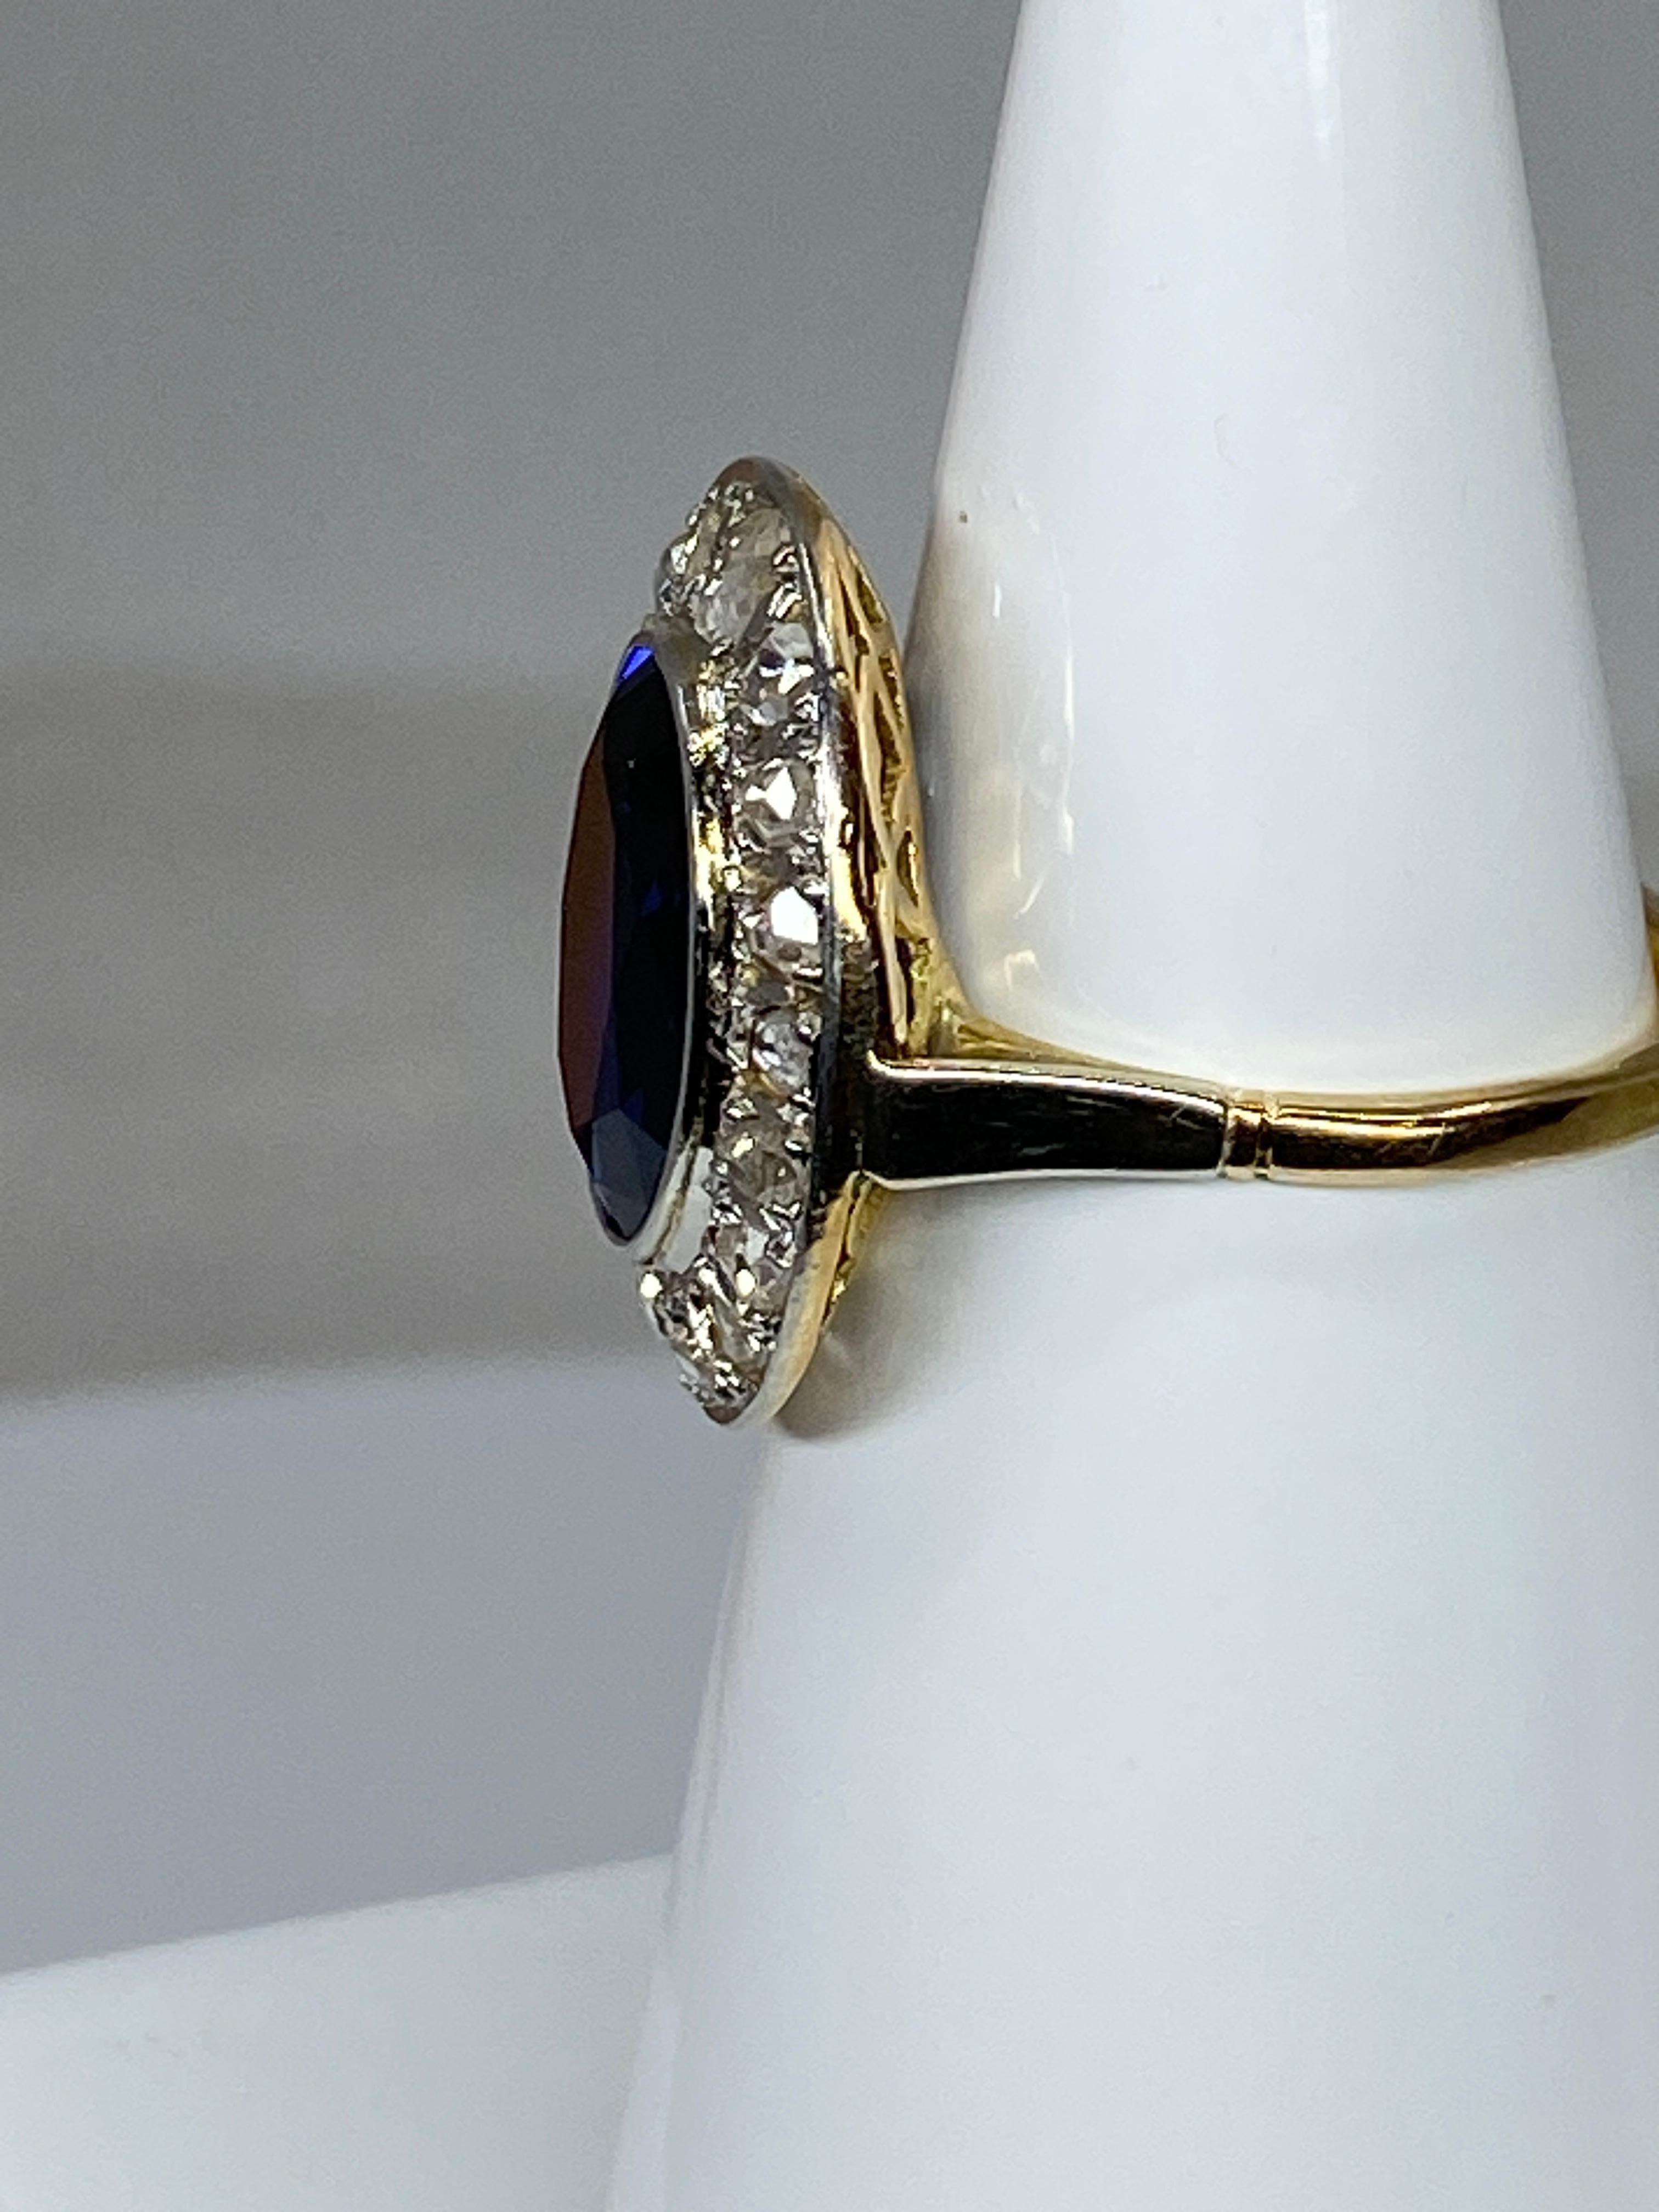 18 Carat Gold Ring Verneuil Sapphire and Rose-Cut Diamonds, 1900 Period 1